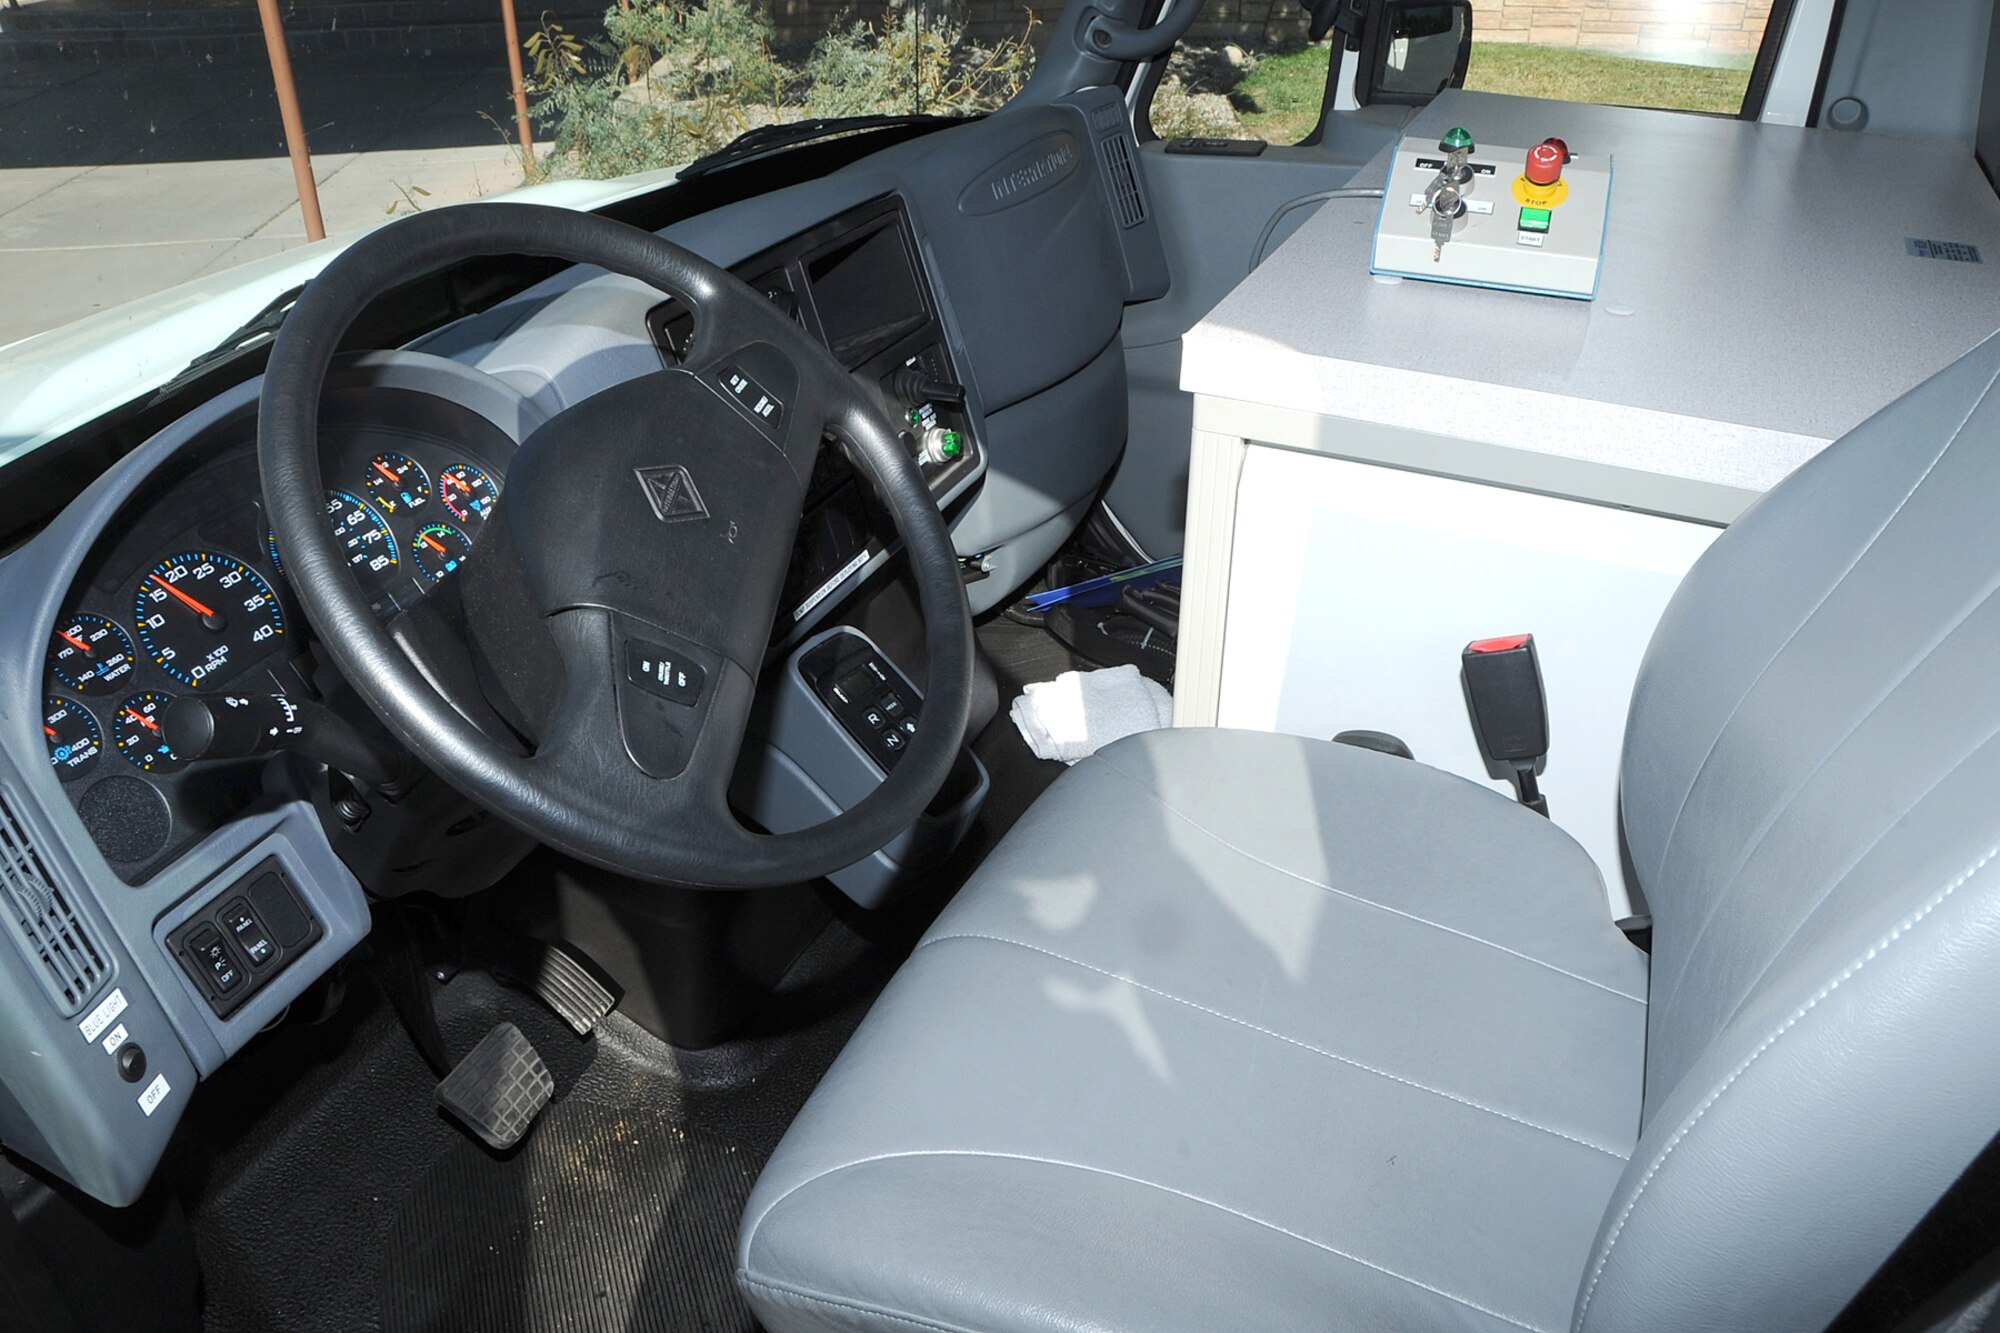 Pictured is the drivers seat of the Rapiscan GaRDS Mobile imaging system where a driver can move the system past parked vehicles while scanning them with an x-ray imaging system. Two GaRDS Systems were donated by Rapiscan Systems Inc. to Holloman Air Force Base, N.M., October 29. (U.S. Air Force photo/Tech Sgt. Chris Flahive)